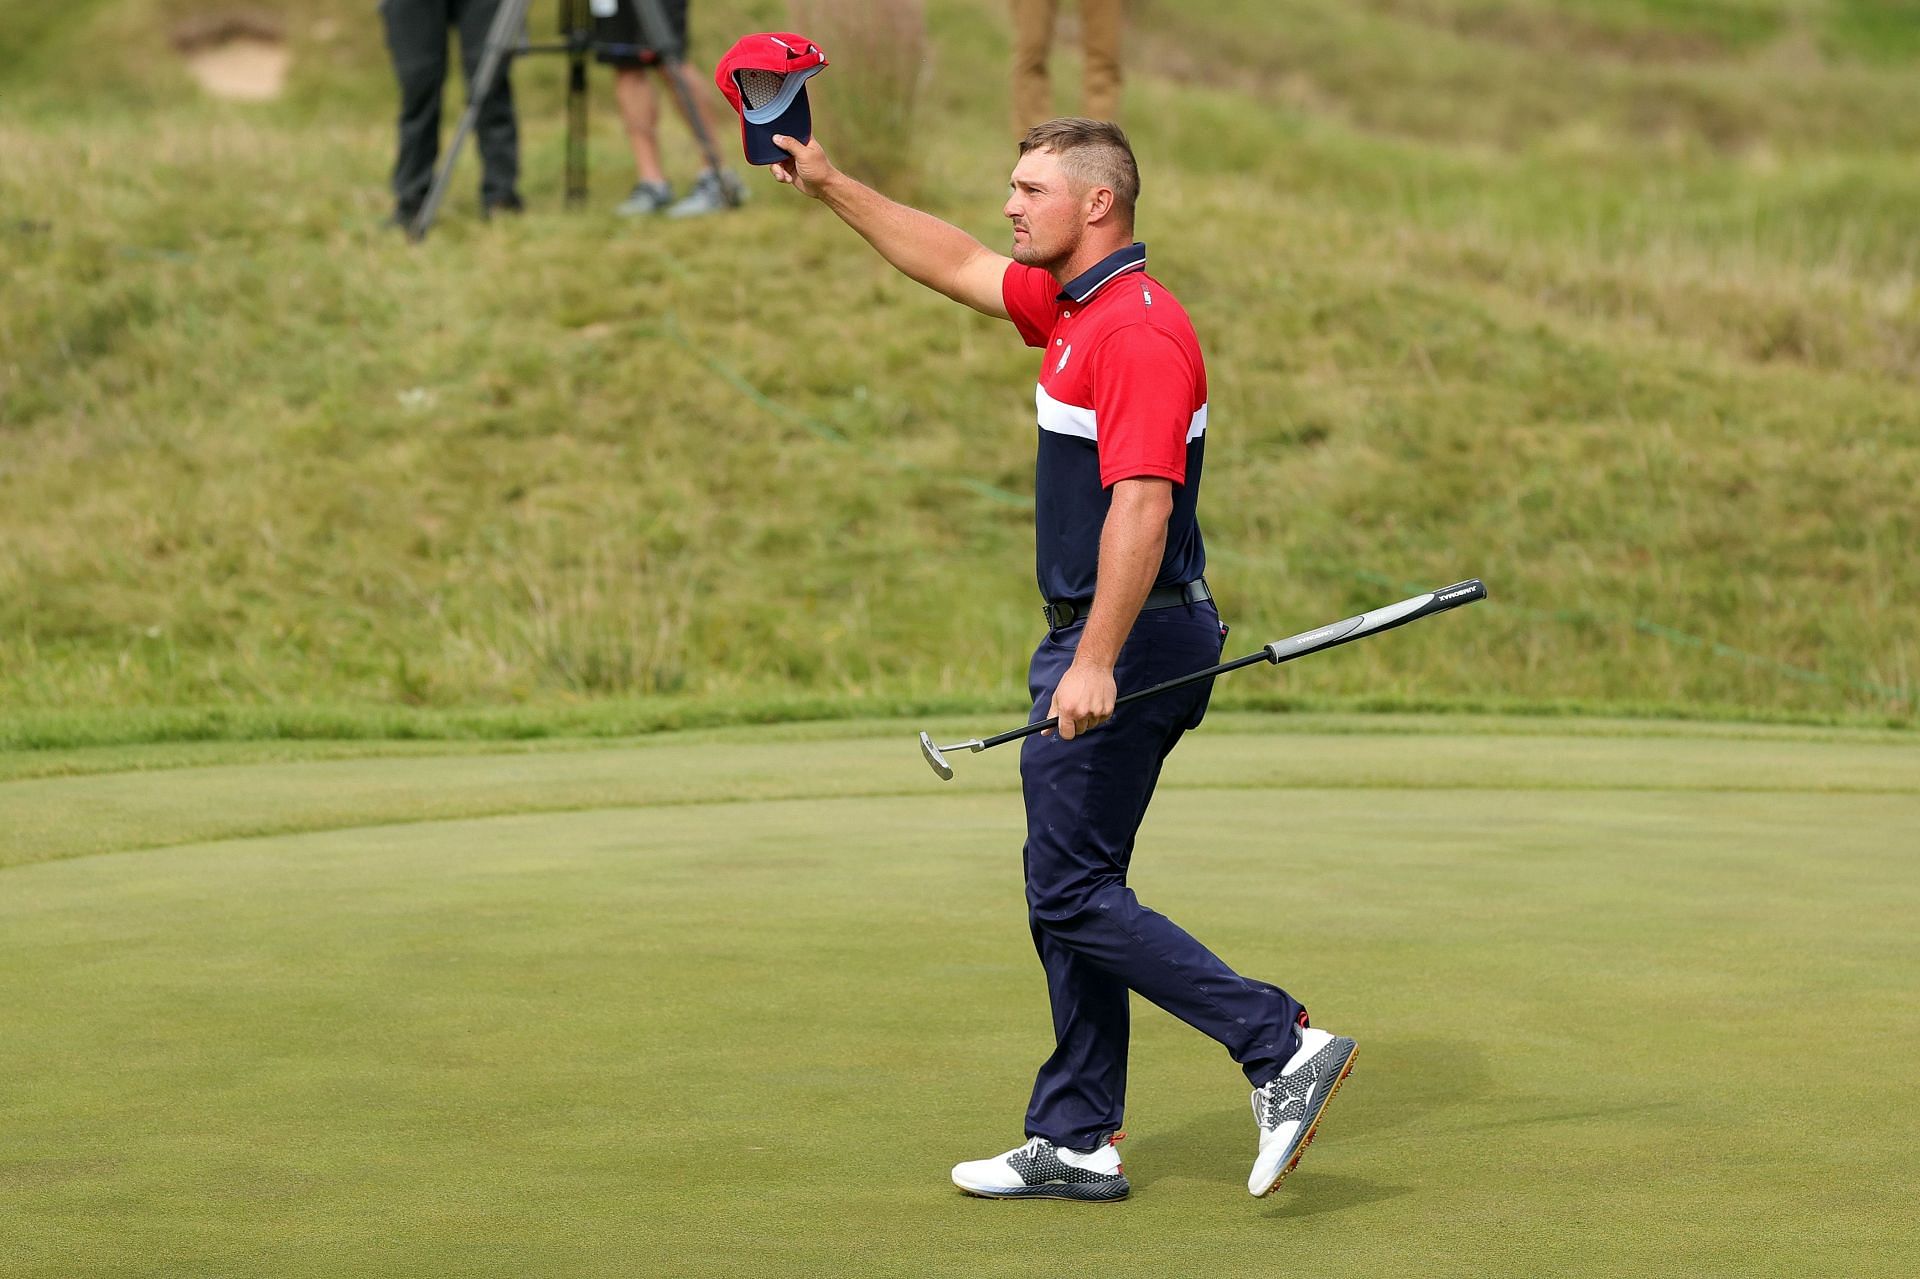 Bryson DeChambeau at the 2021 Ryder Cup (Image via Getty).